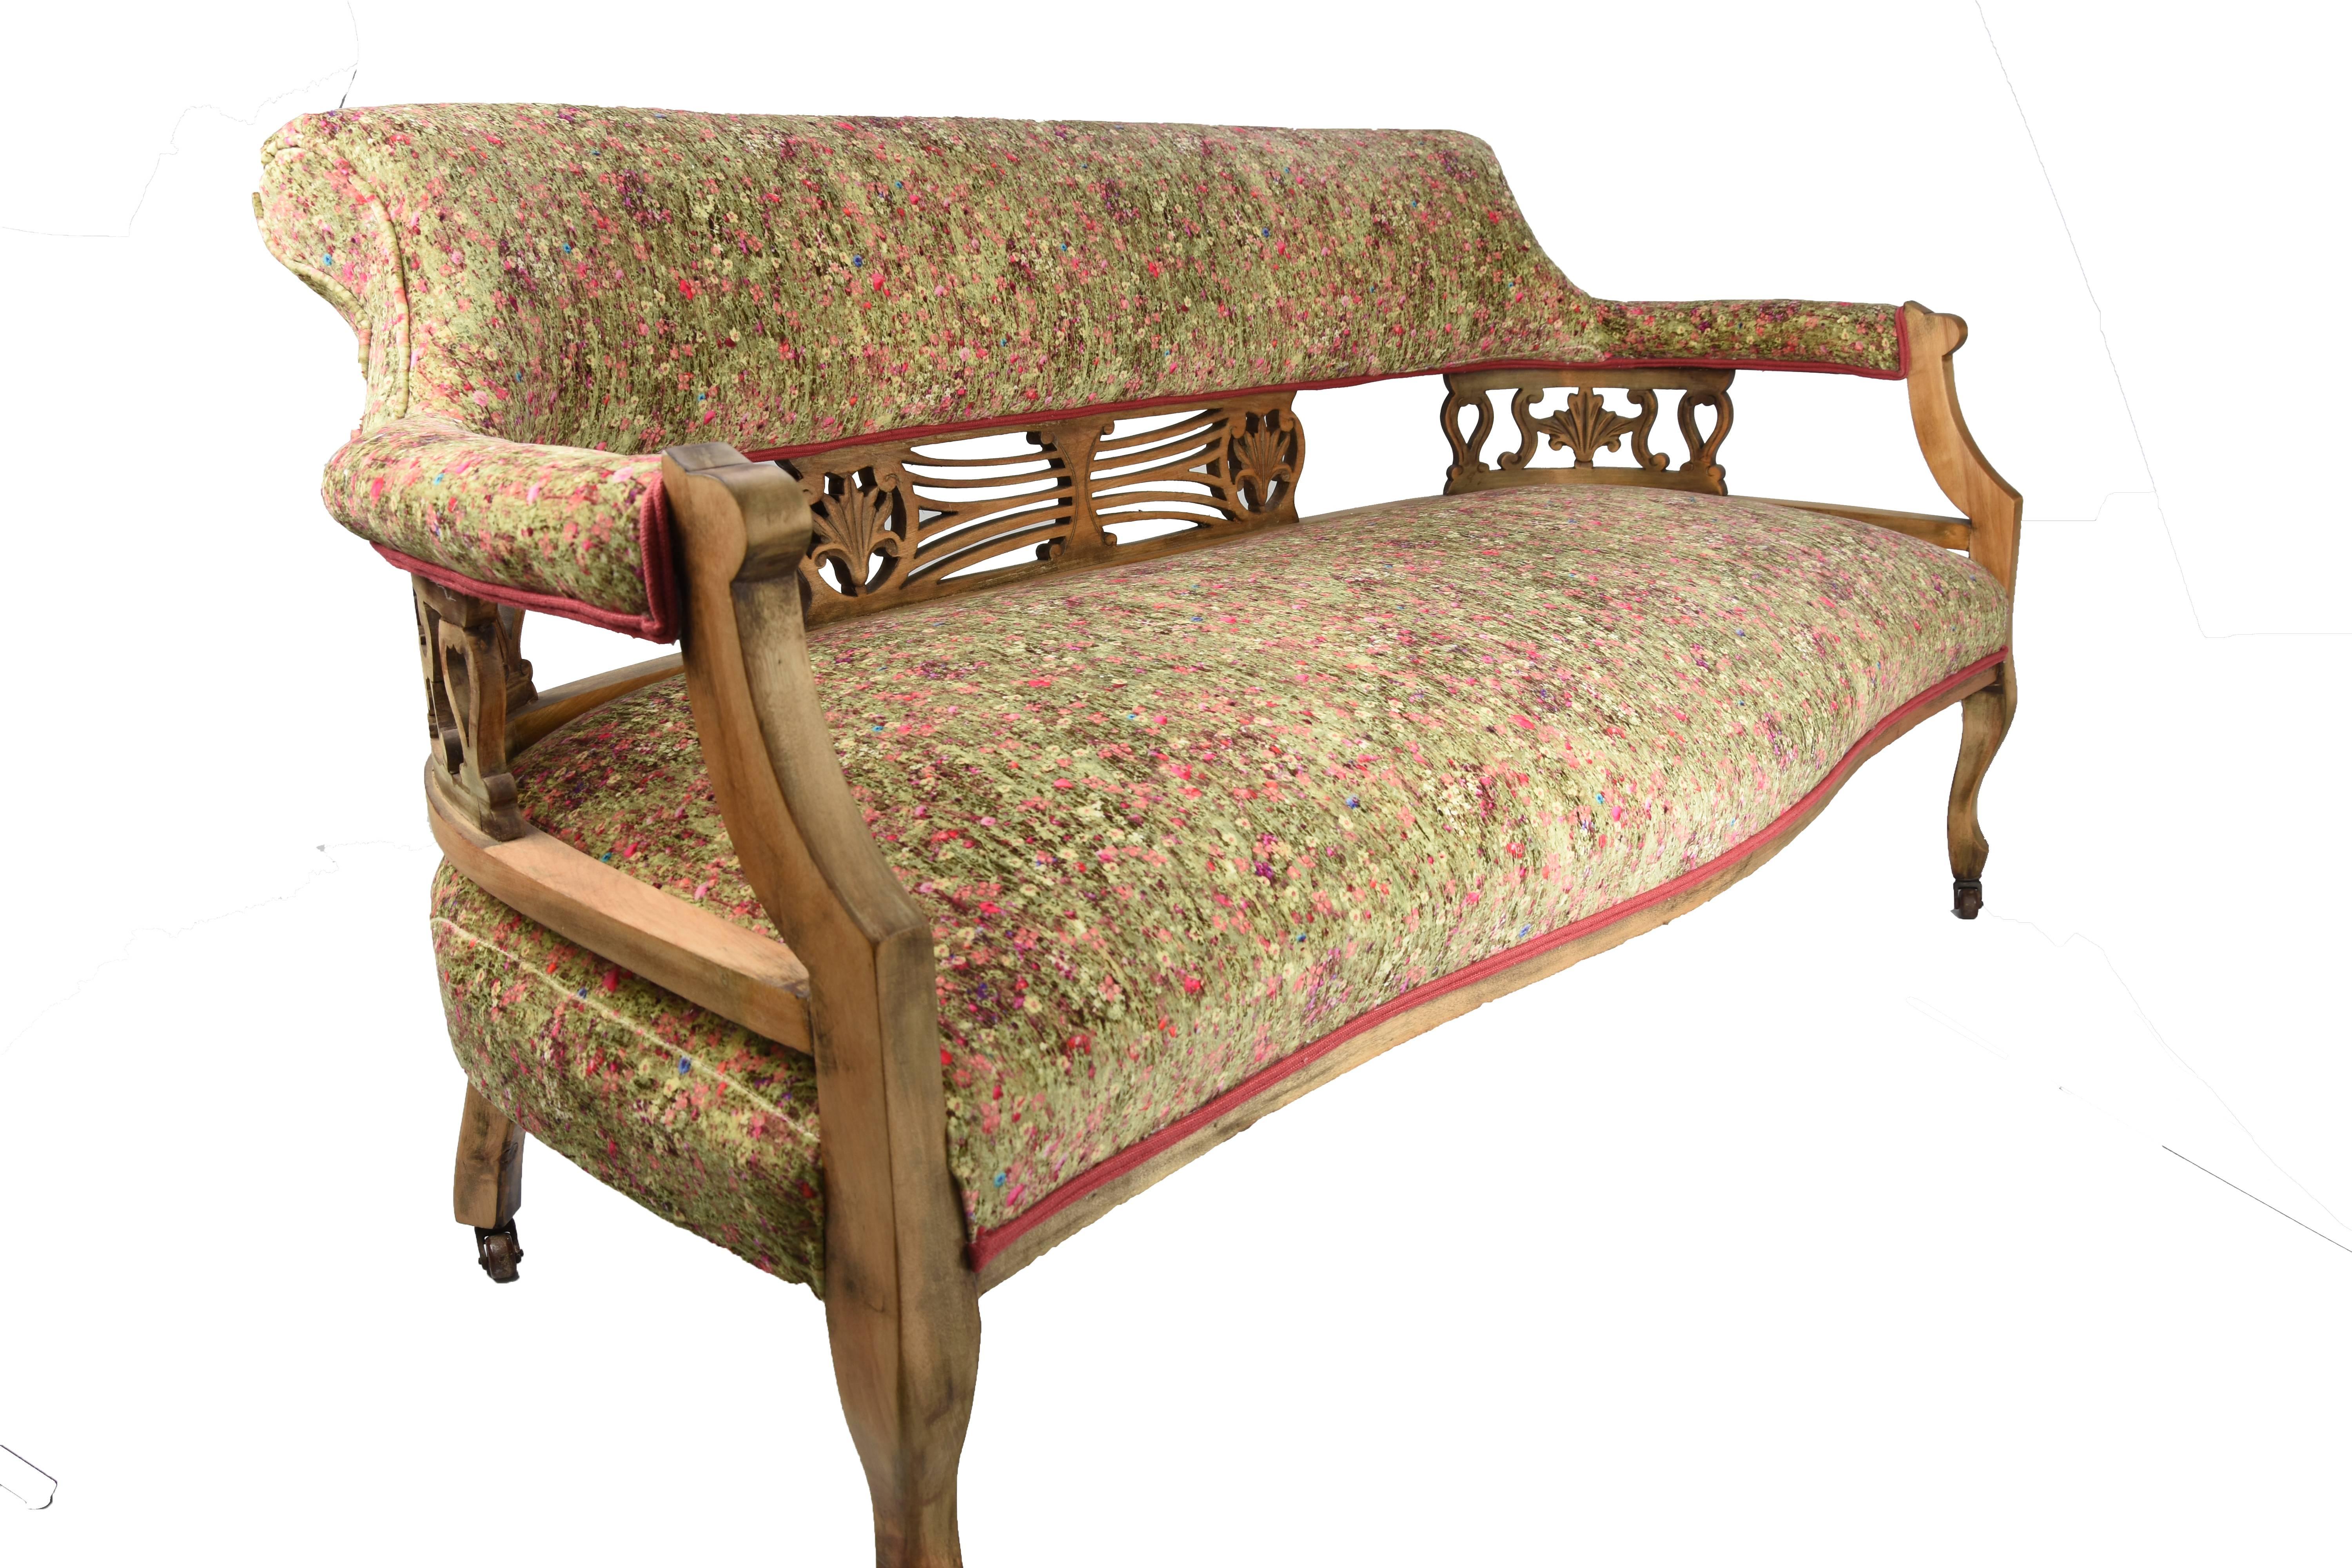 An outstanding victorian sofa upholstered with great care using traditional techniques. Covered with an elegant velvet material, this unique piece features a lovely carving wood detail. An astonishing vintage piece for your lovely home. 